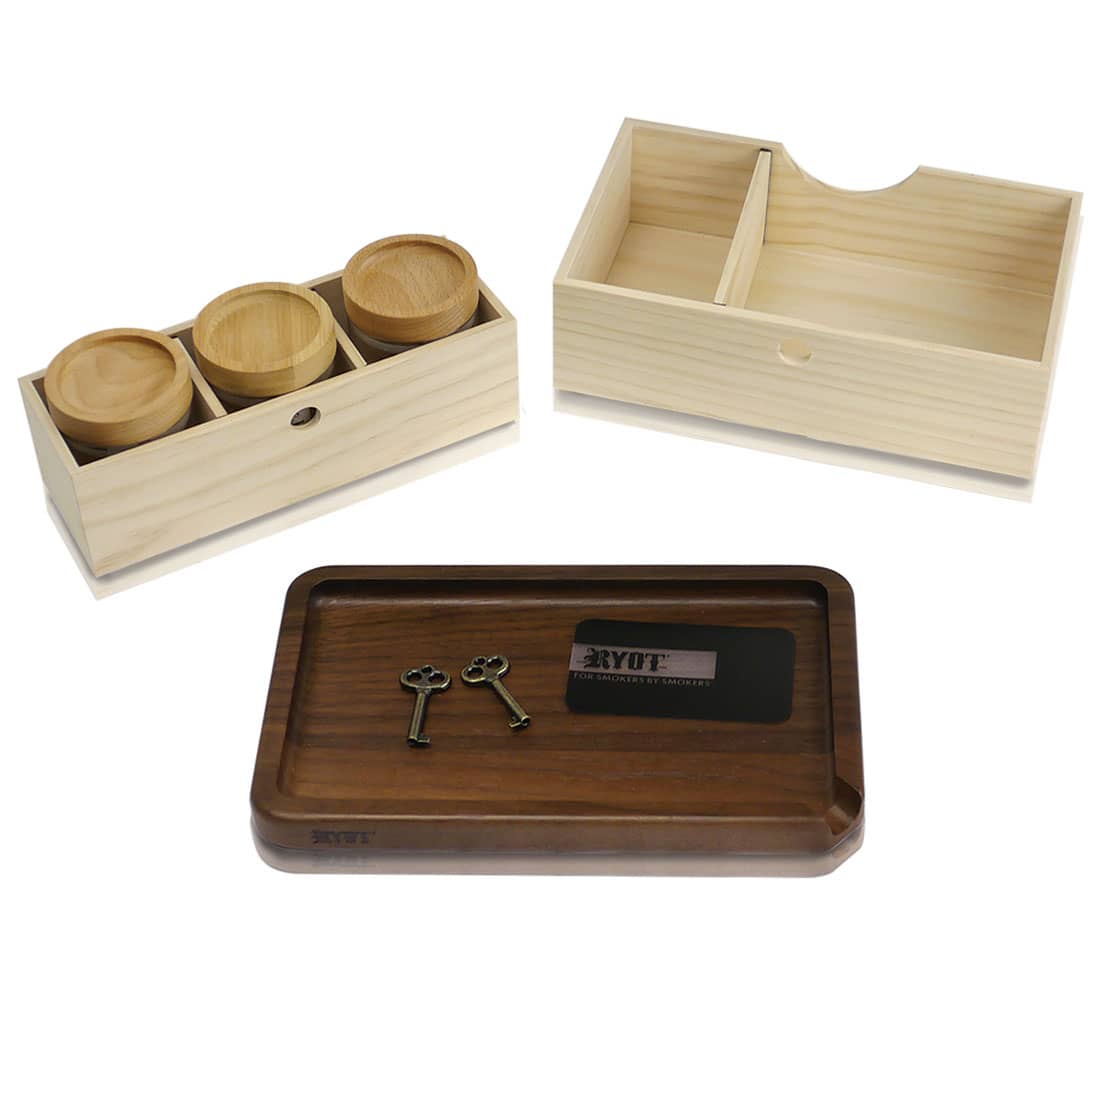 Product Review: RYOT's Lock-R Stash Box